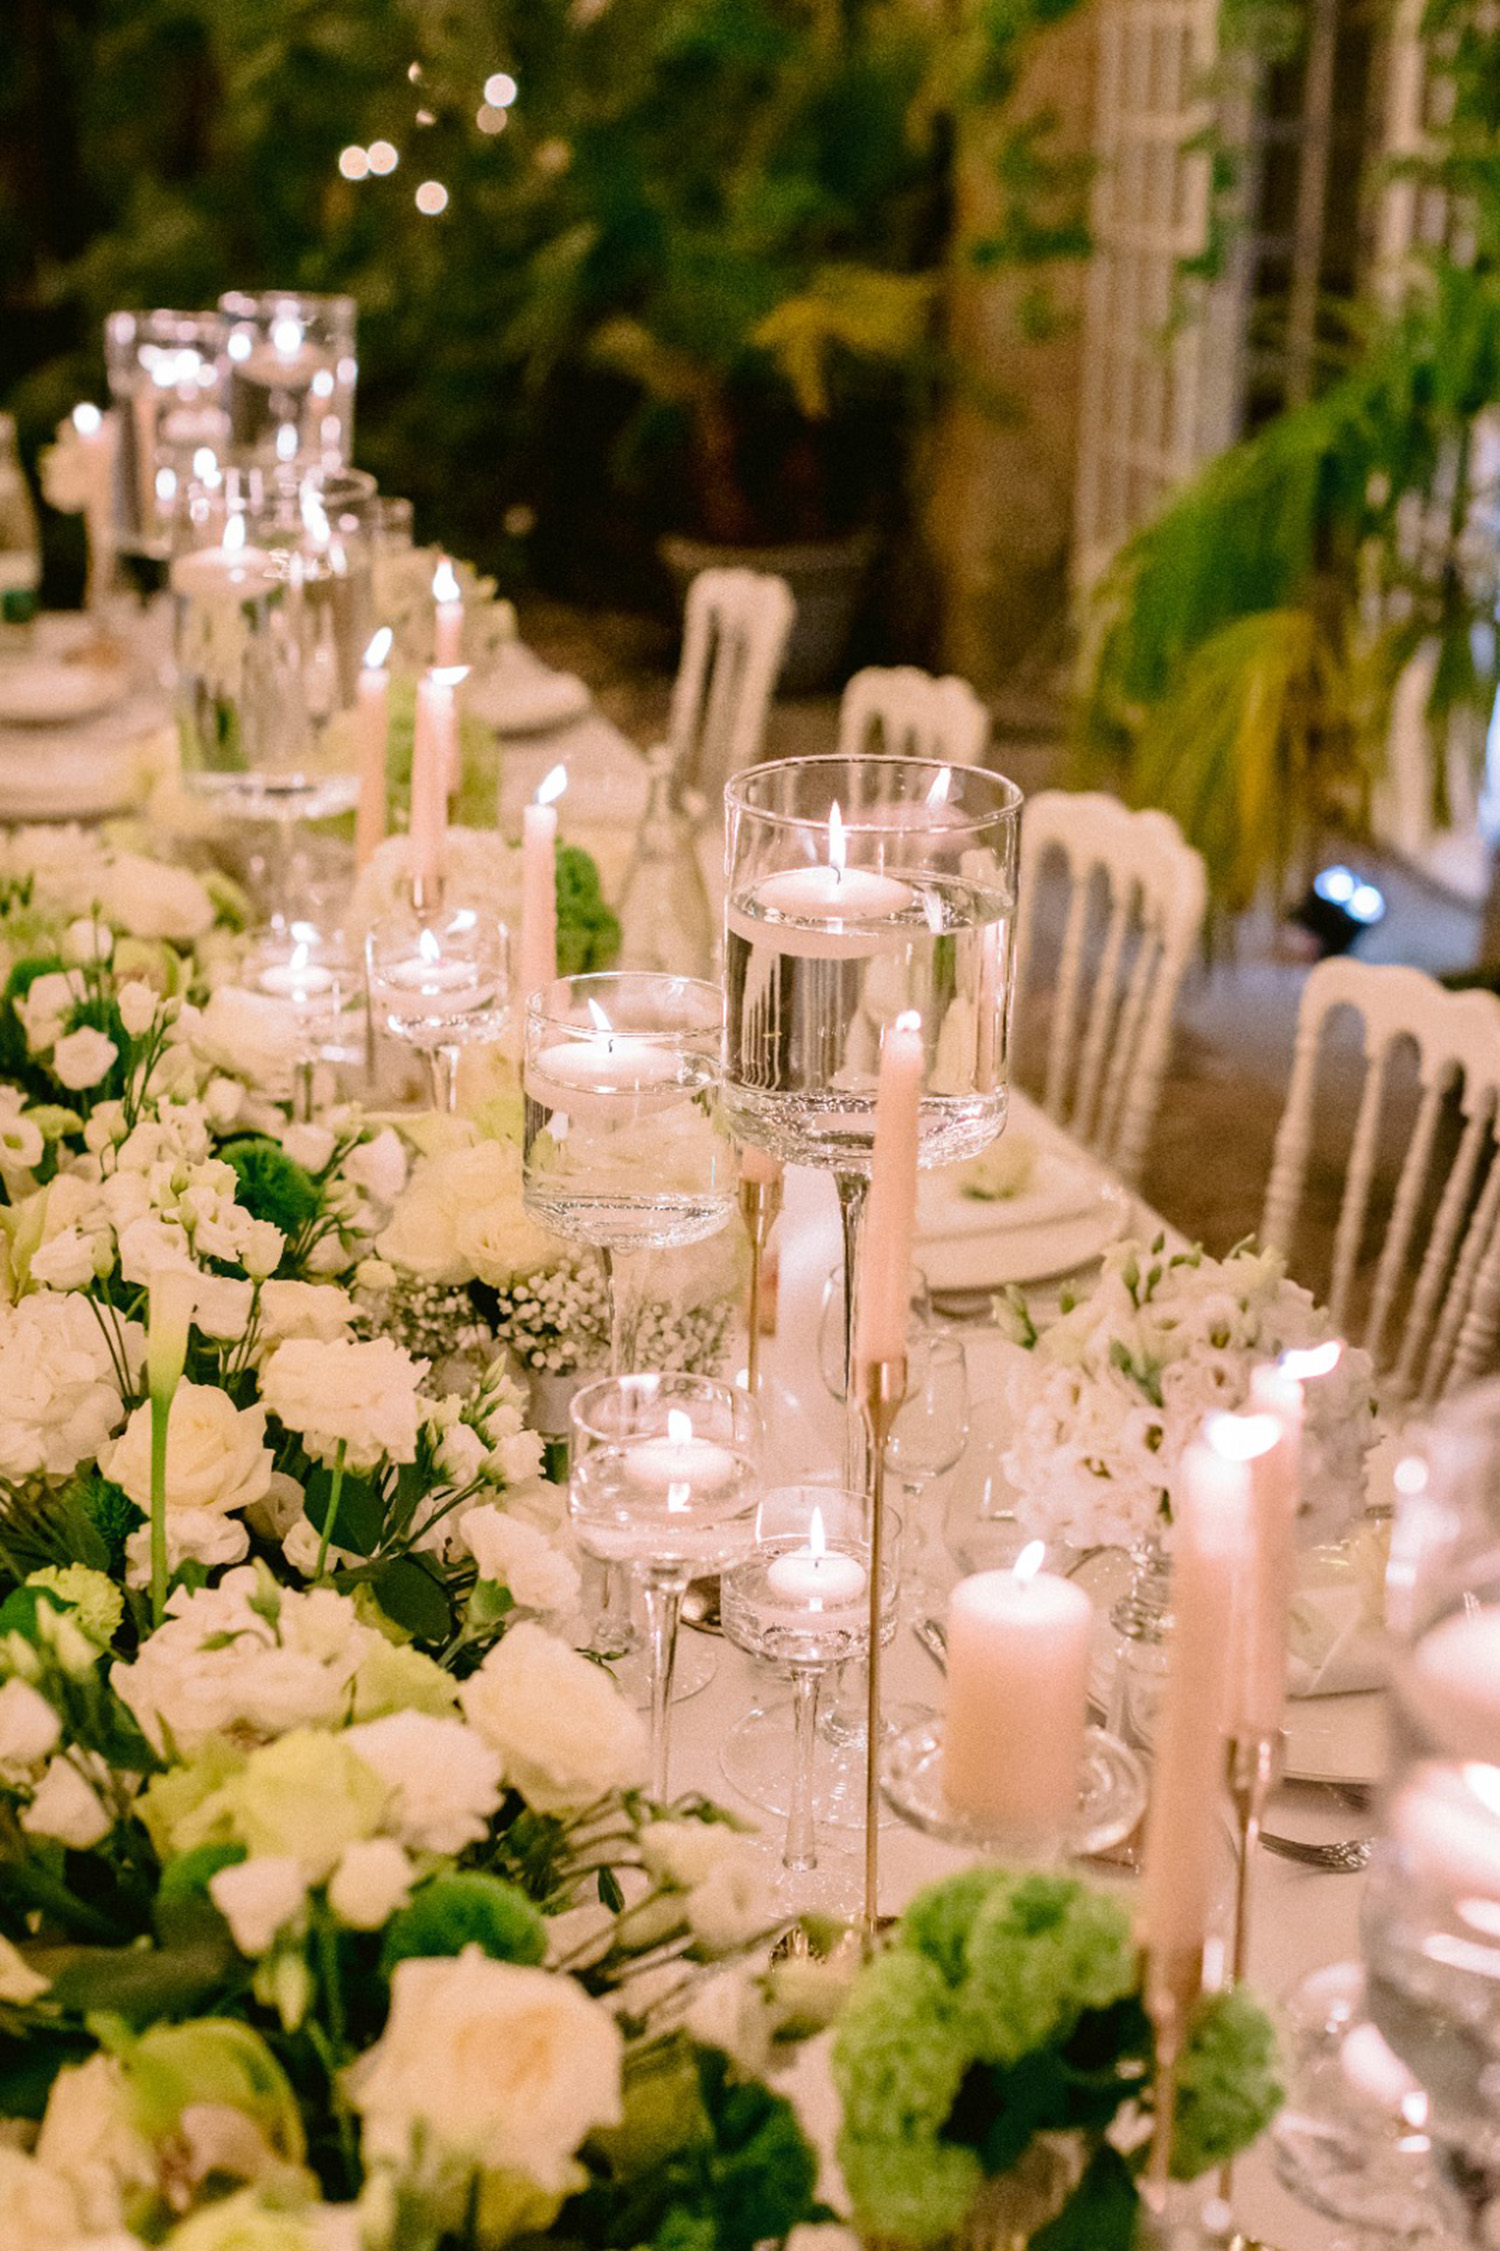 composition-dinner-table-fleurs-feuillage-bougies